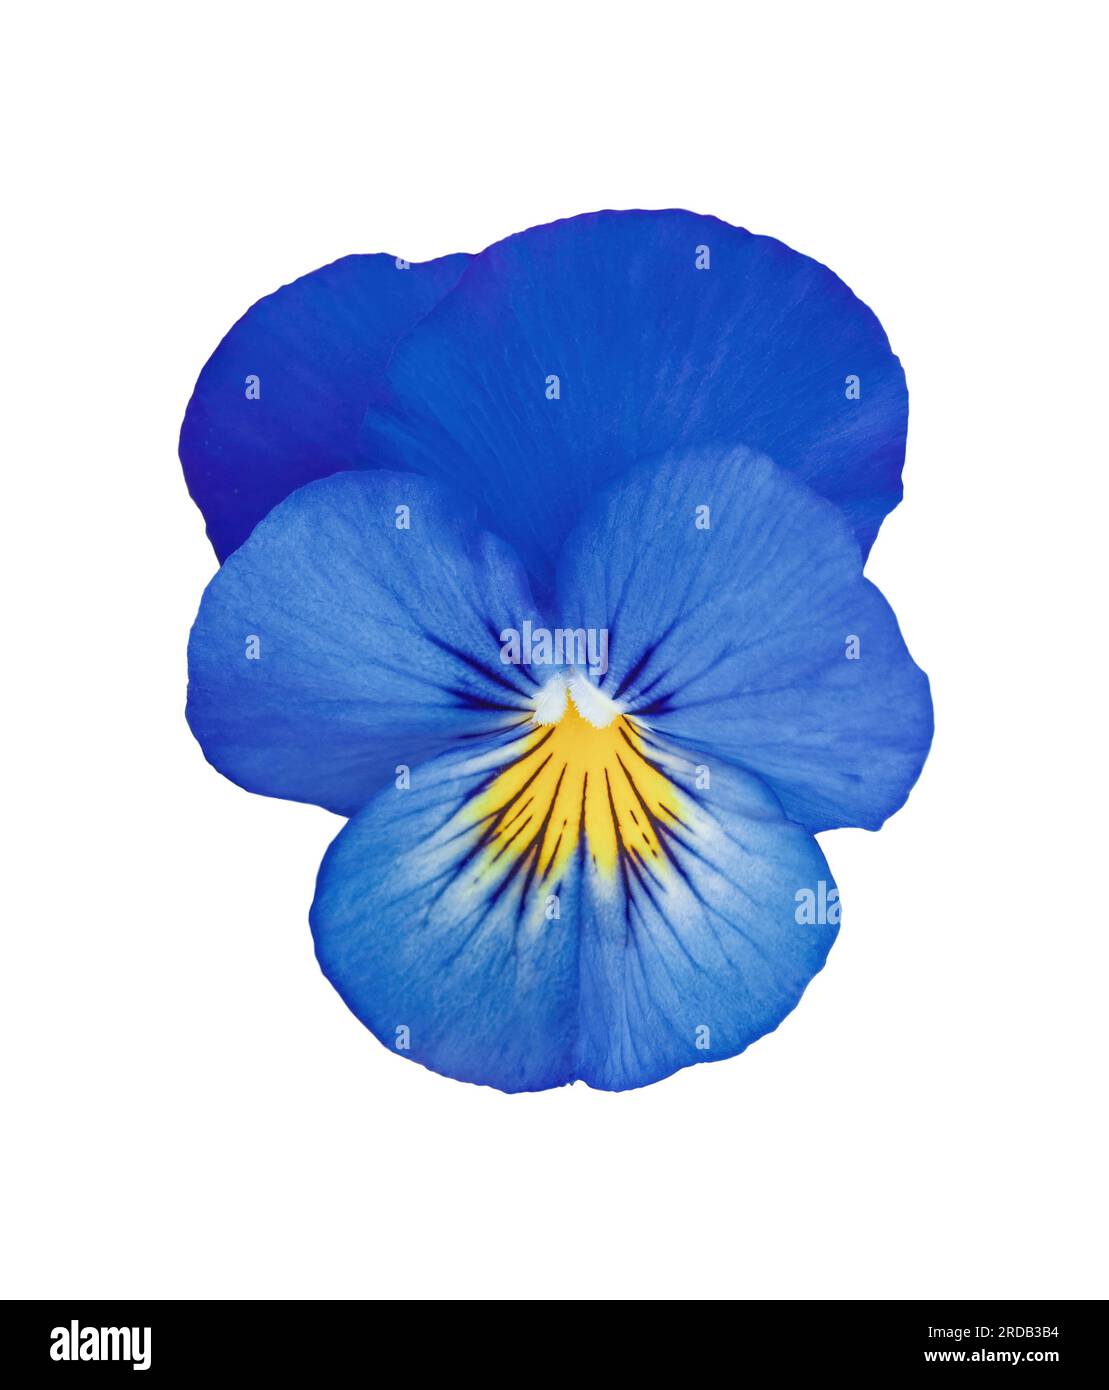 Сloseup blue pansy flower isolated on white background. Bright heartsease garden icon. Blooming Viola wirttrockiana plants cut out element for design. Stock Photo